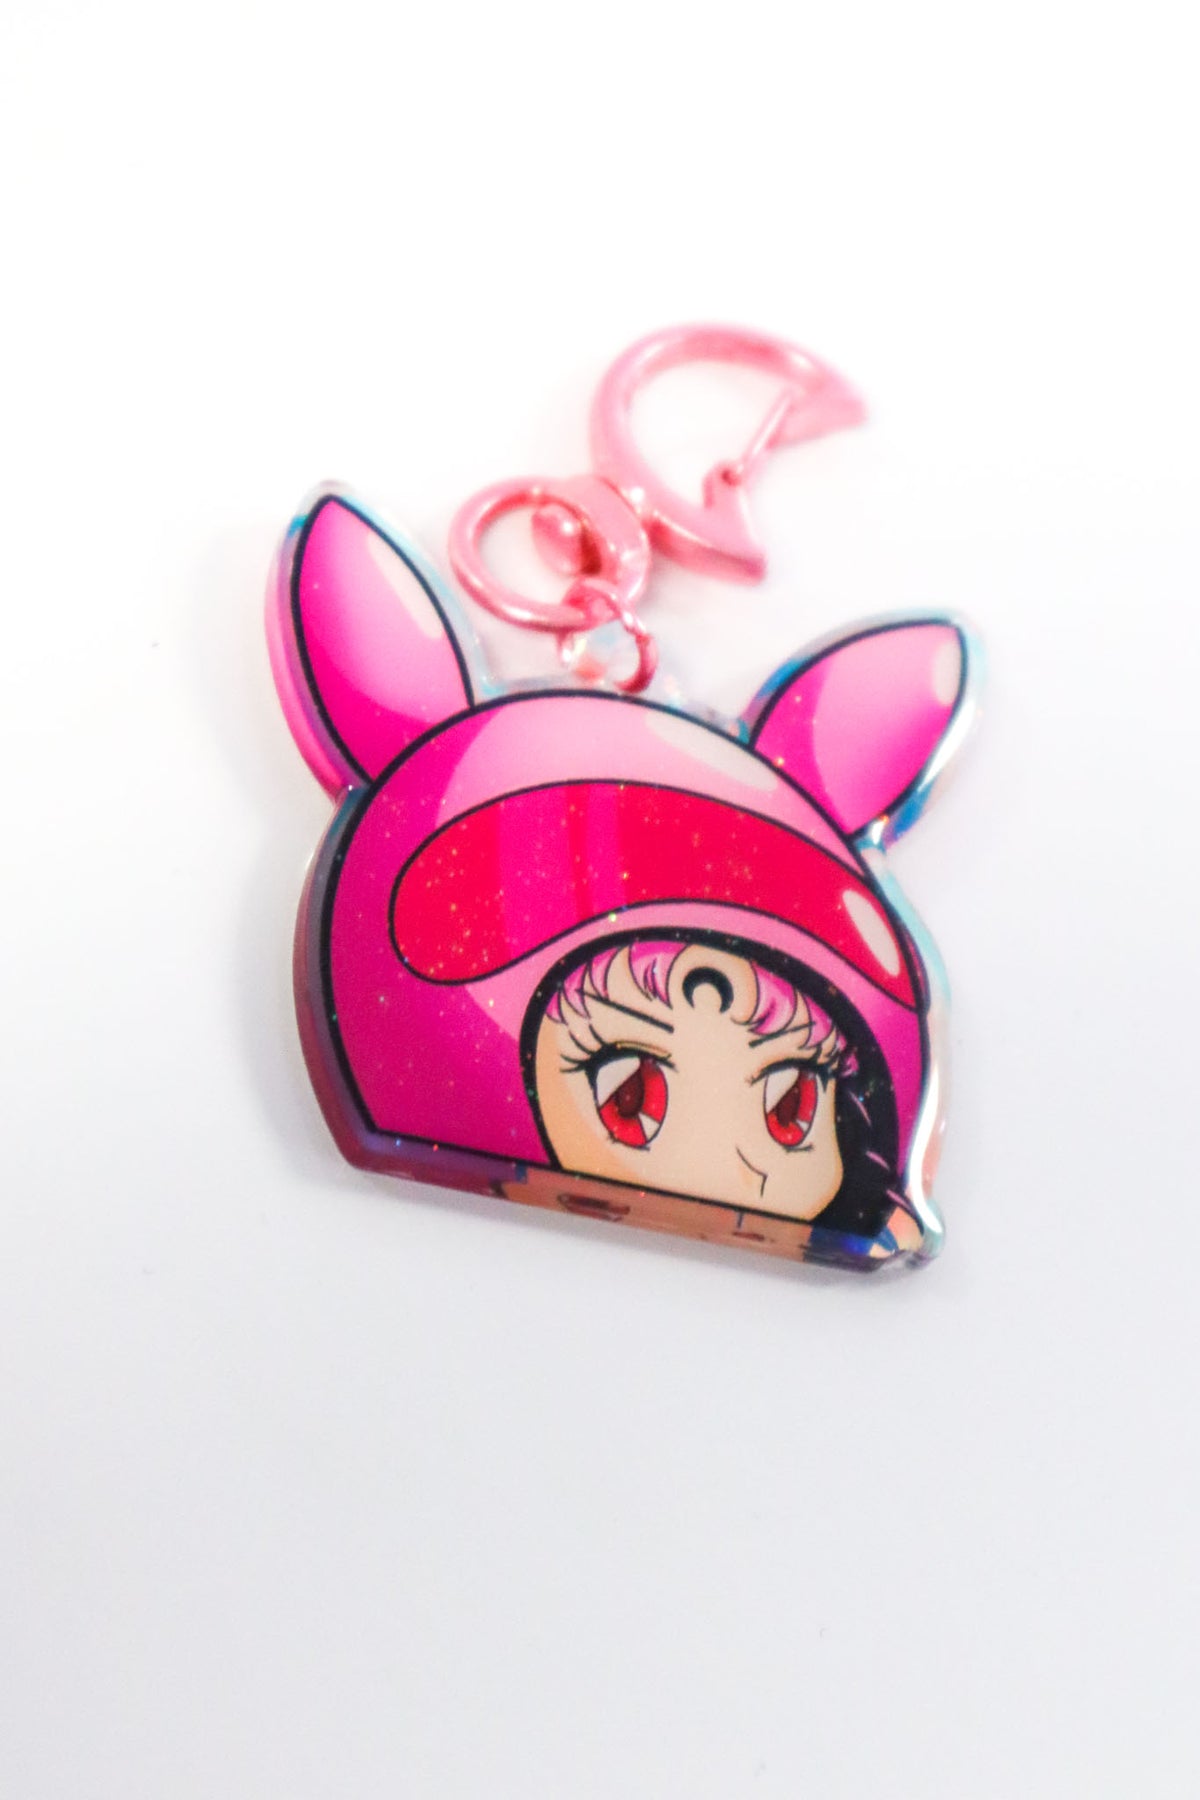 Racer Scouts Peekers Keyring - Racer Wicked Lady  Drift bunny decals